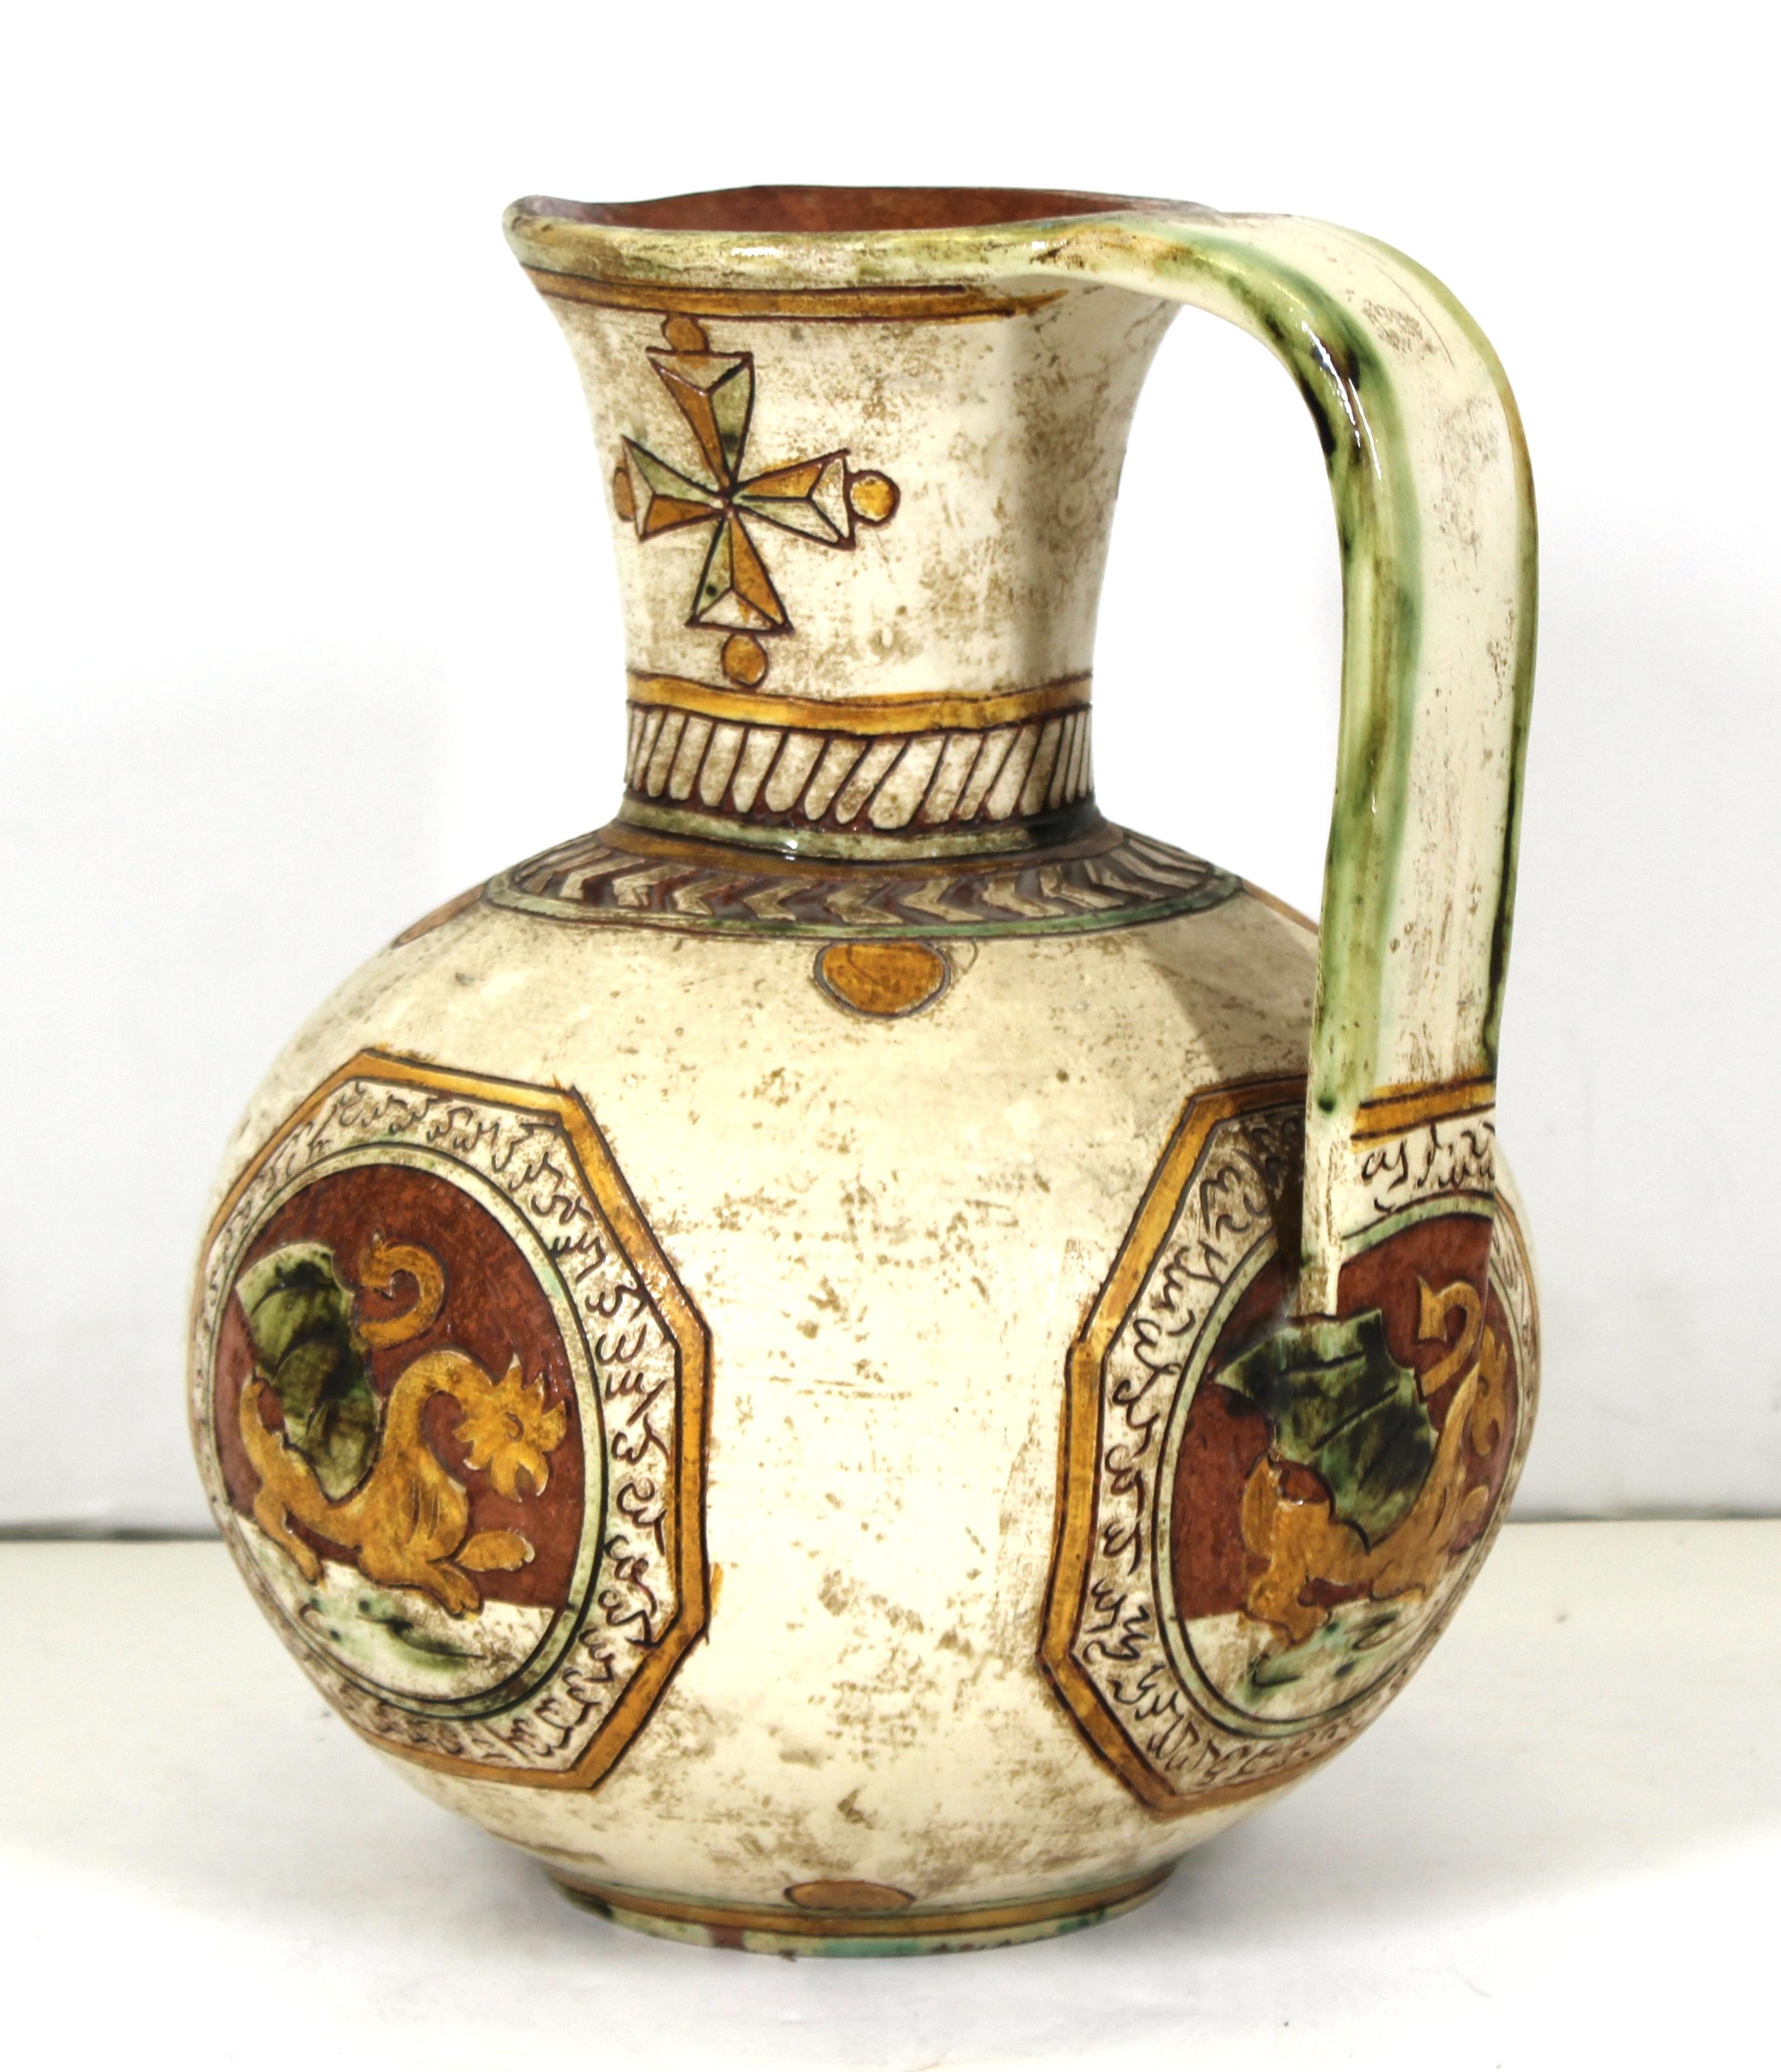 Italian Renaissance Revival Sgraffito Ceramic Pitcher with Dragon Motif In Good Condition For Sale In New York, NY